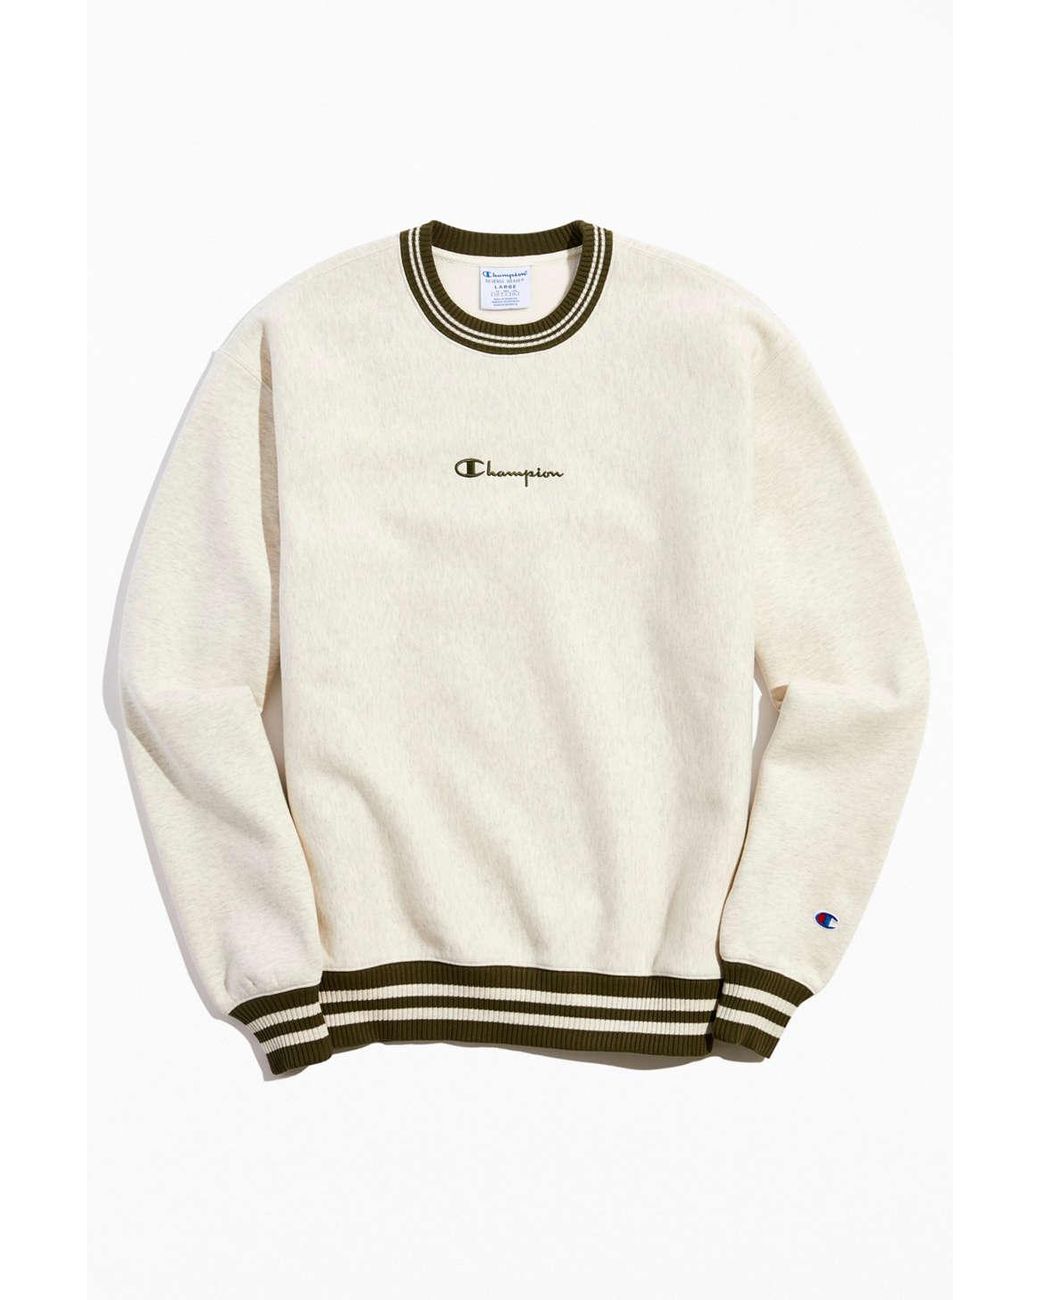 Champion Uo Exclusive Reverse Weave Ringer Crew Neck Sweatshirt in Ivory  (White) for Men | Lyst